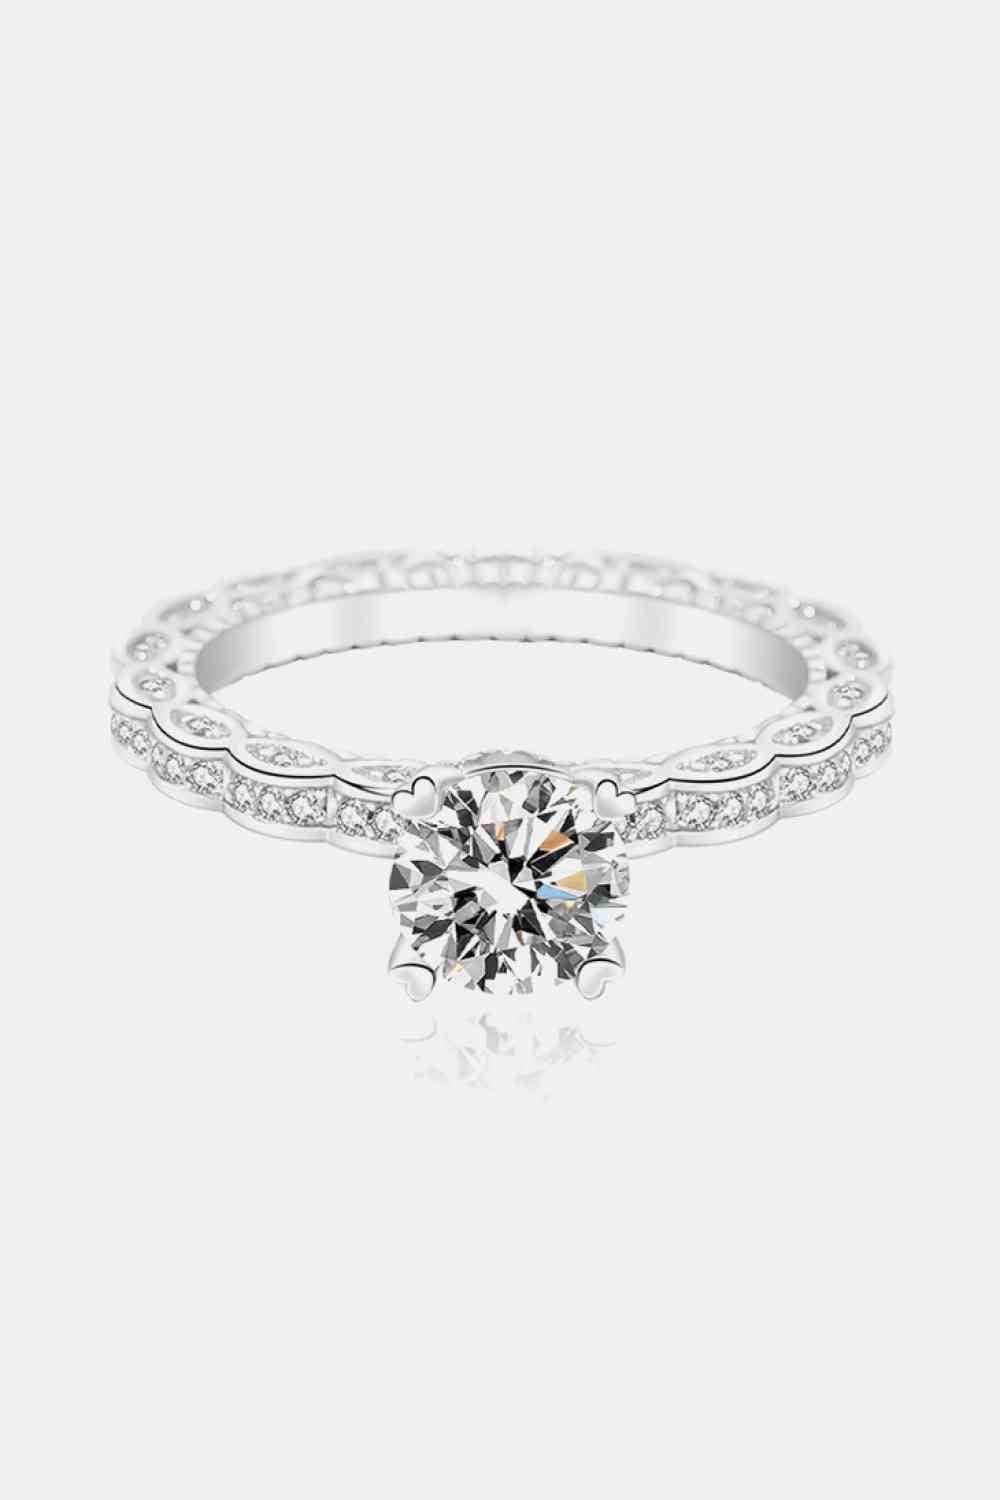 1 Carat Moissanite Platinum Plated 925 Sterling Silver Ring